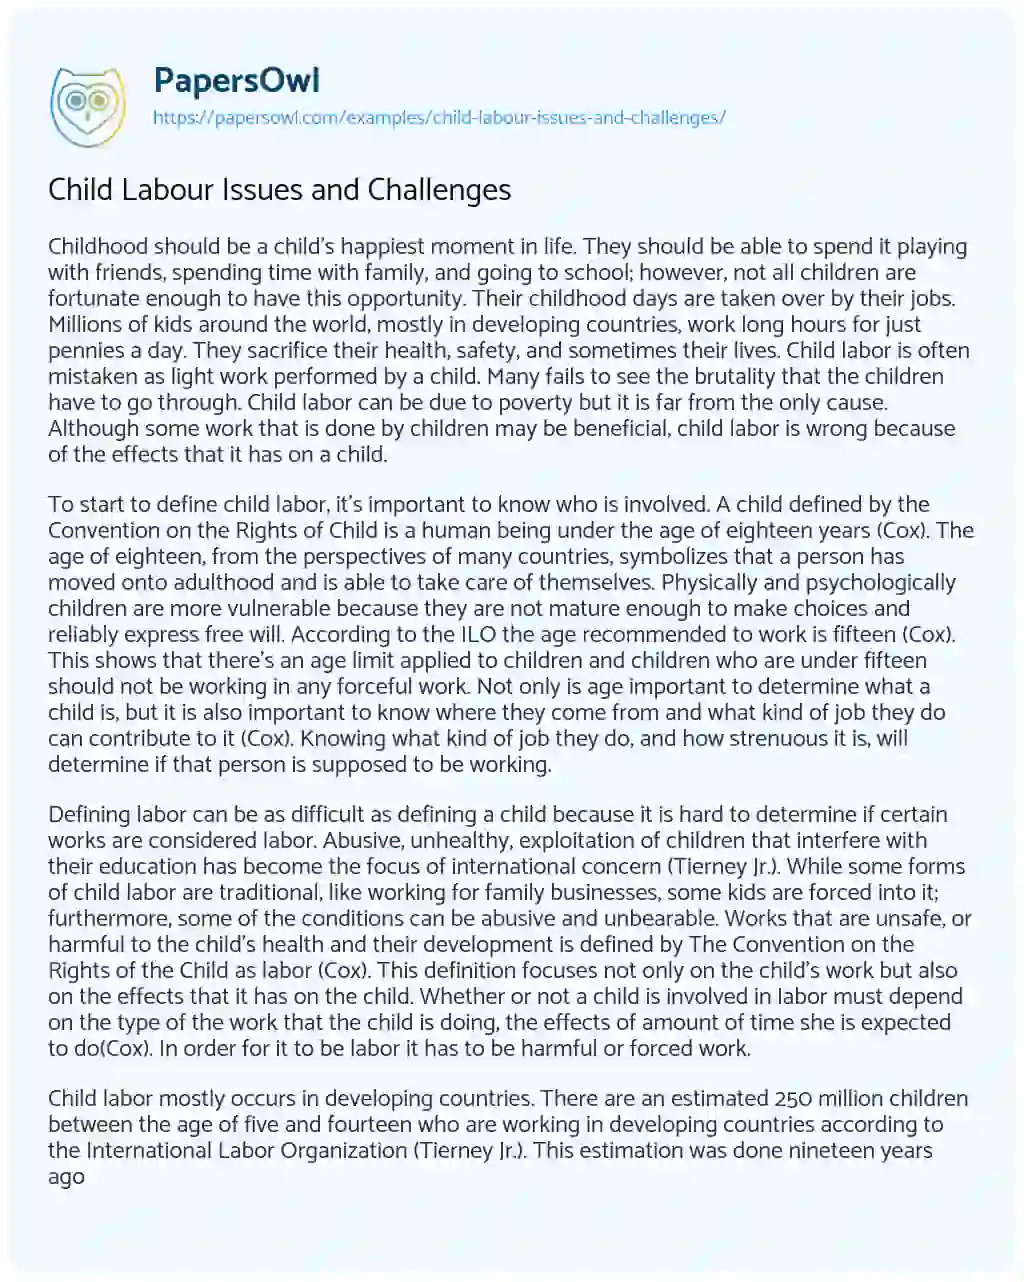 Child Labour Issues and Challenges - Free Essay Example - 2116 Words ...